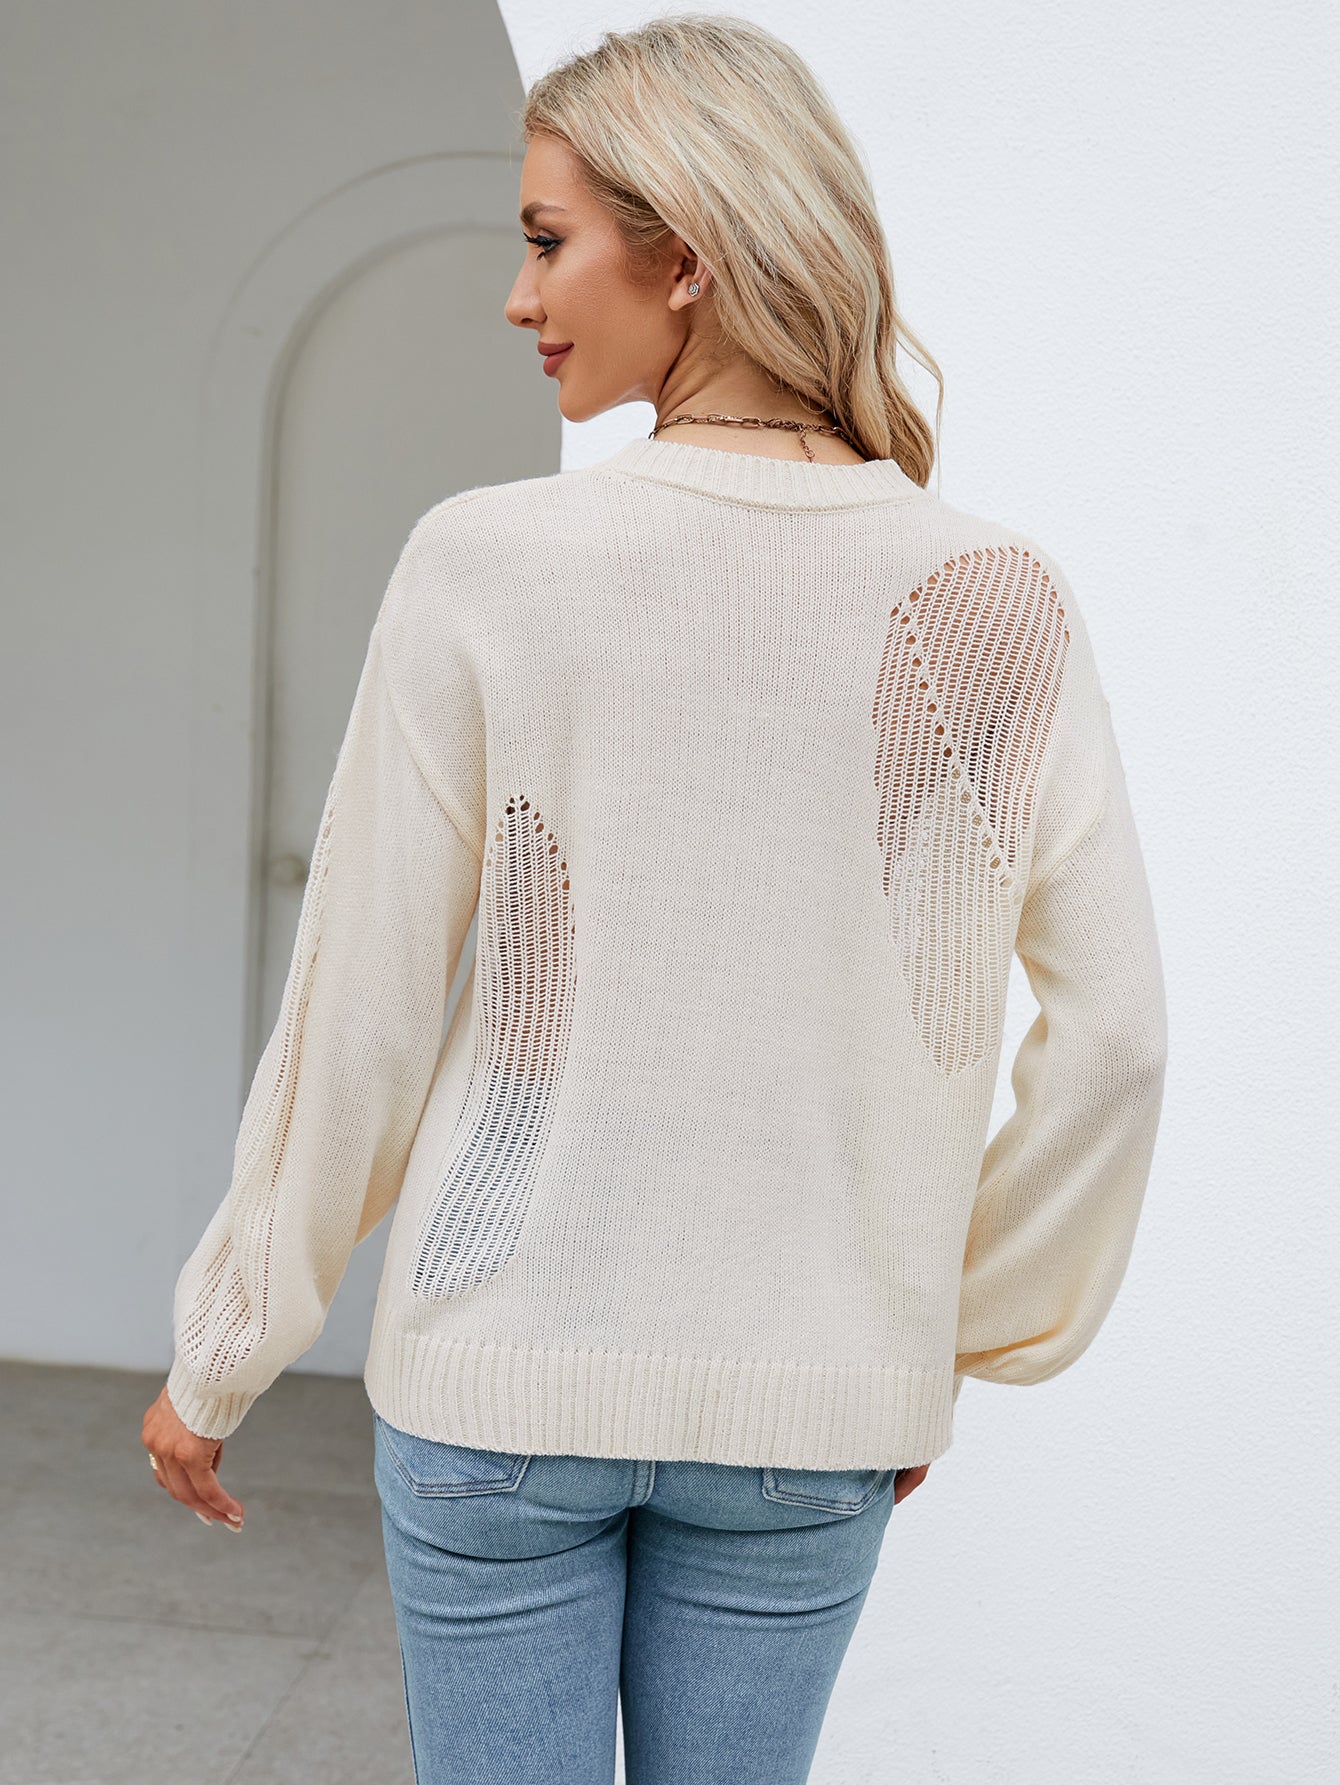 Contemporary Knitwear: Mesh Side Sweater - Perfect for Any Occasion! Sweaters - Chuzko Women Clothing